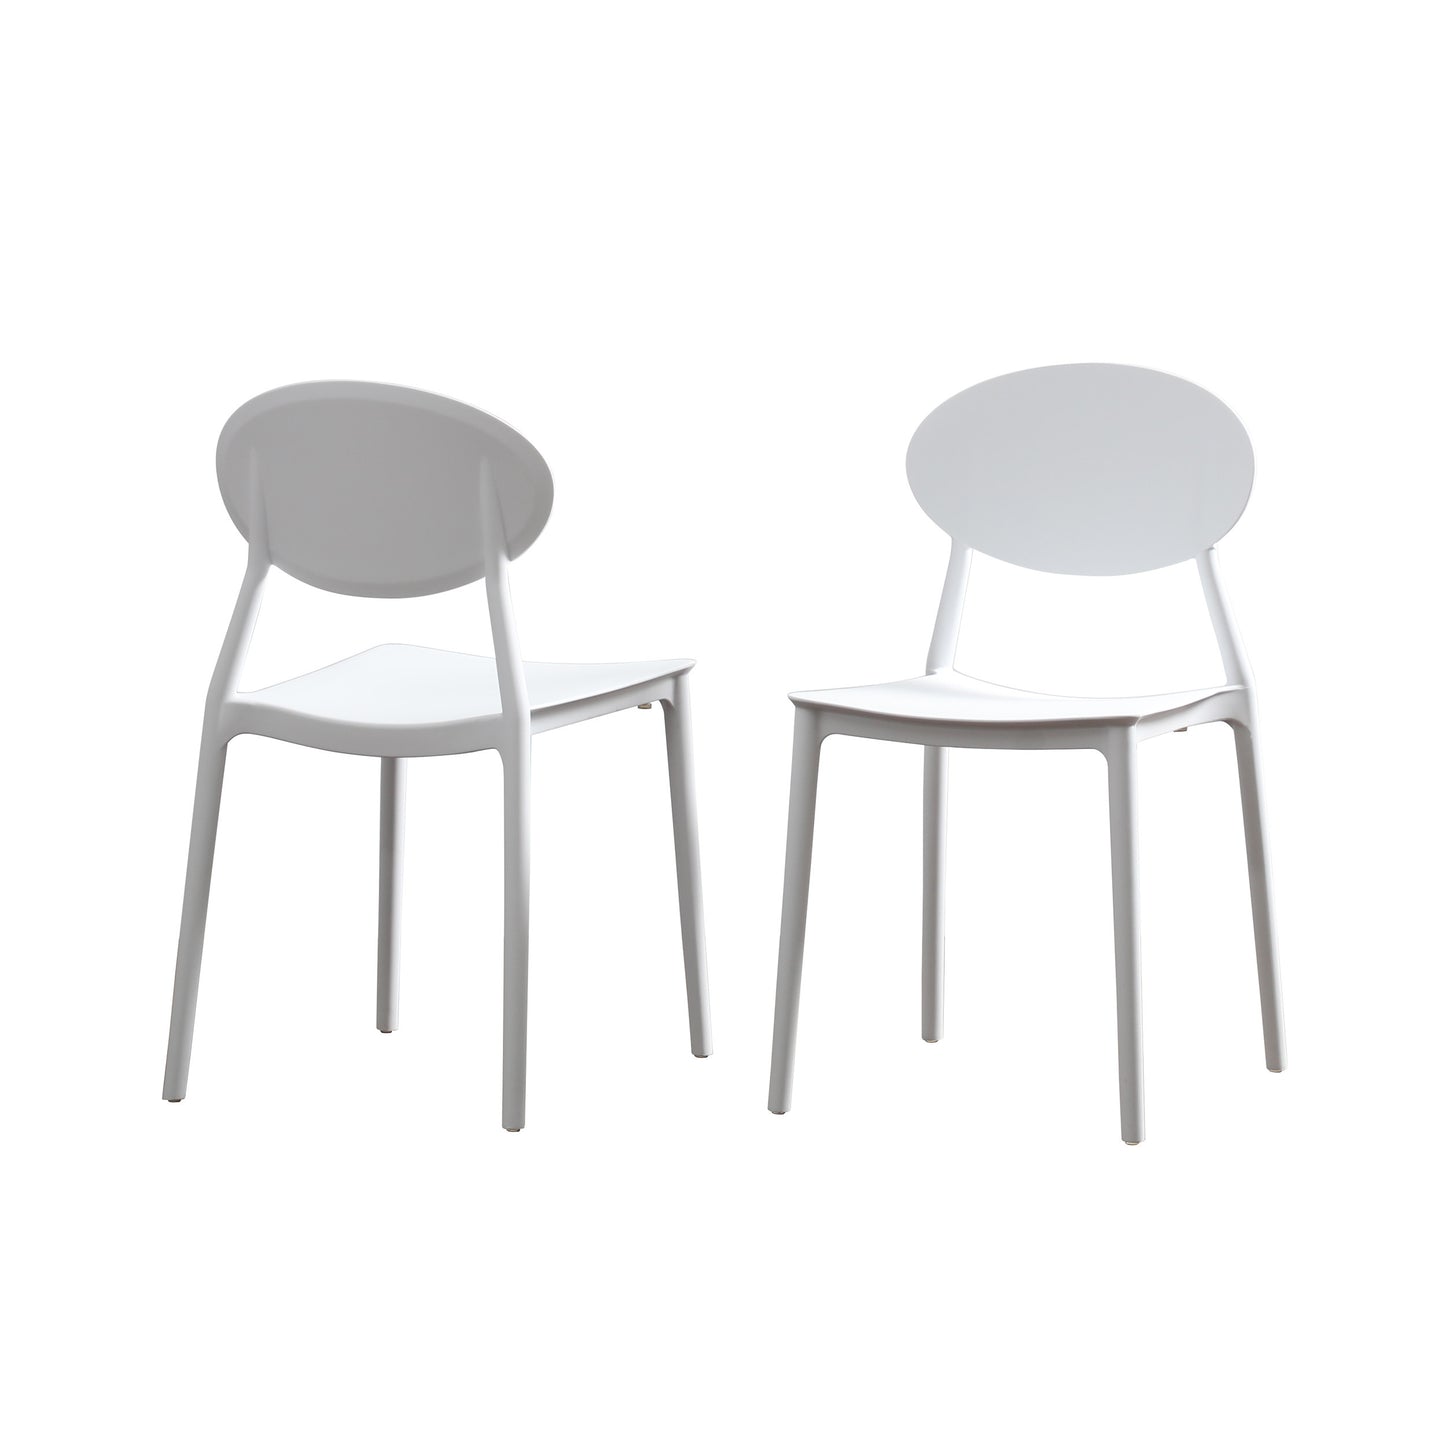 Brynn Outdoor Plastic Chairs (Set of 2)